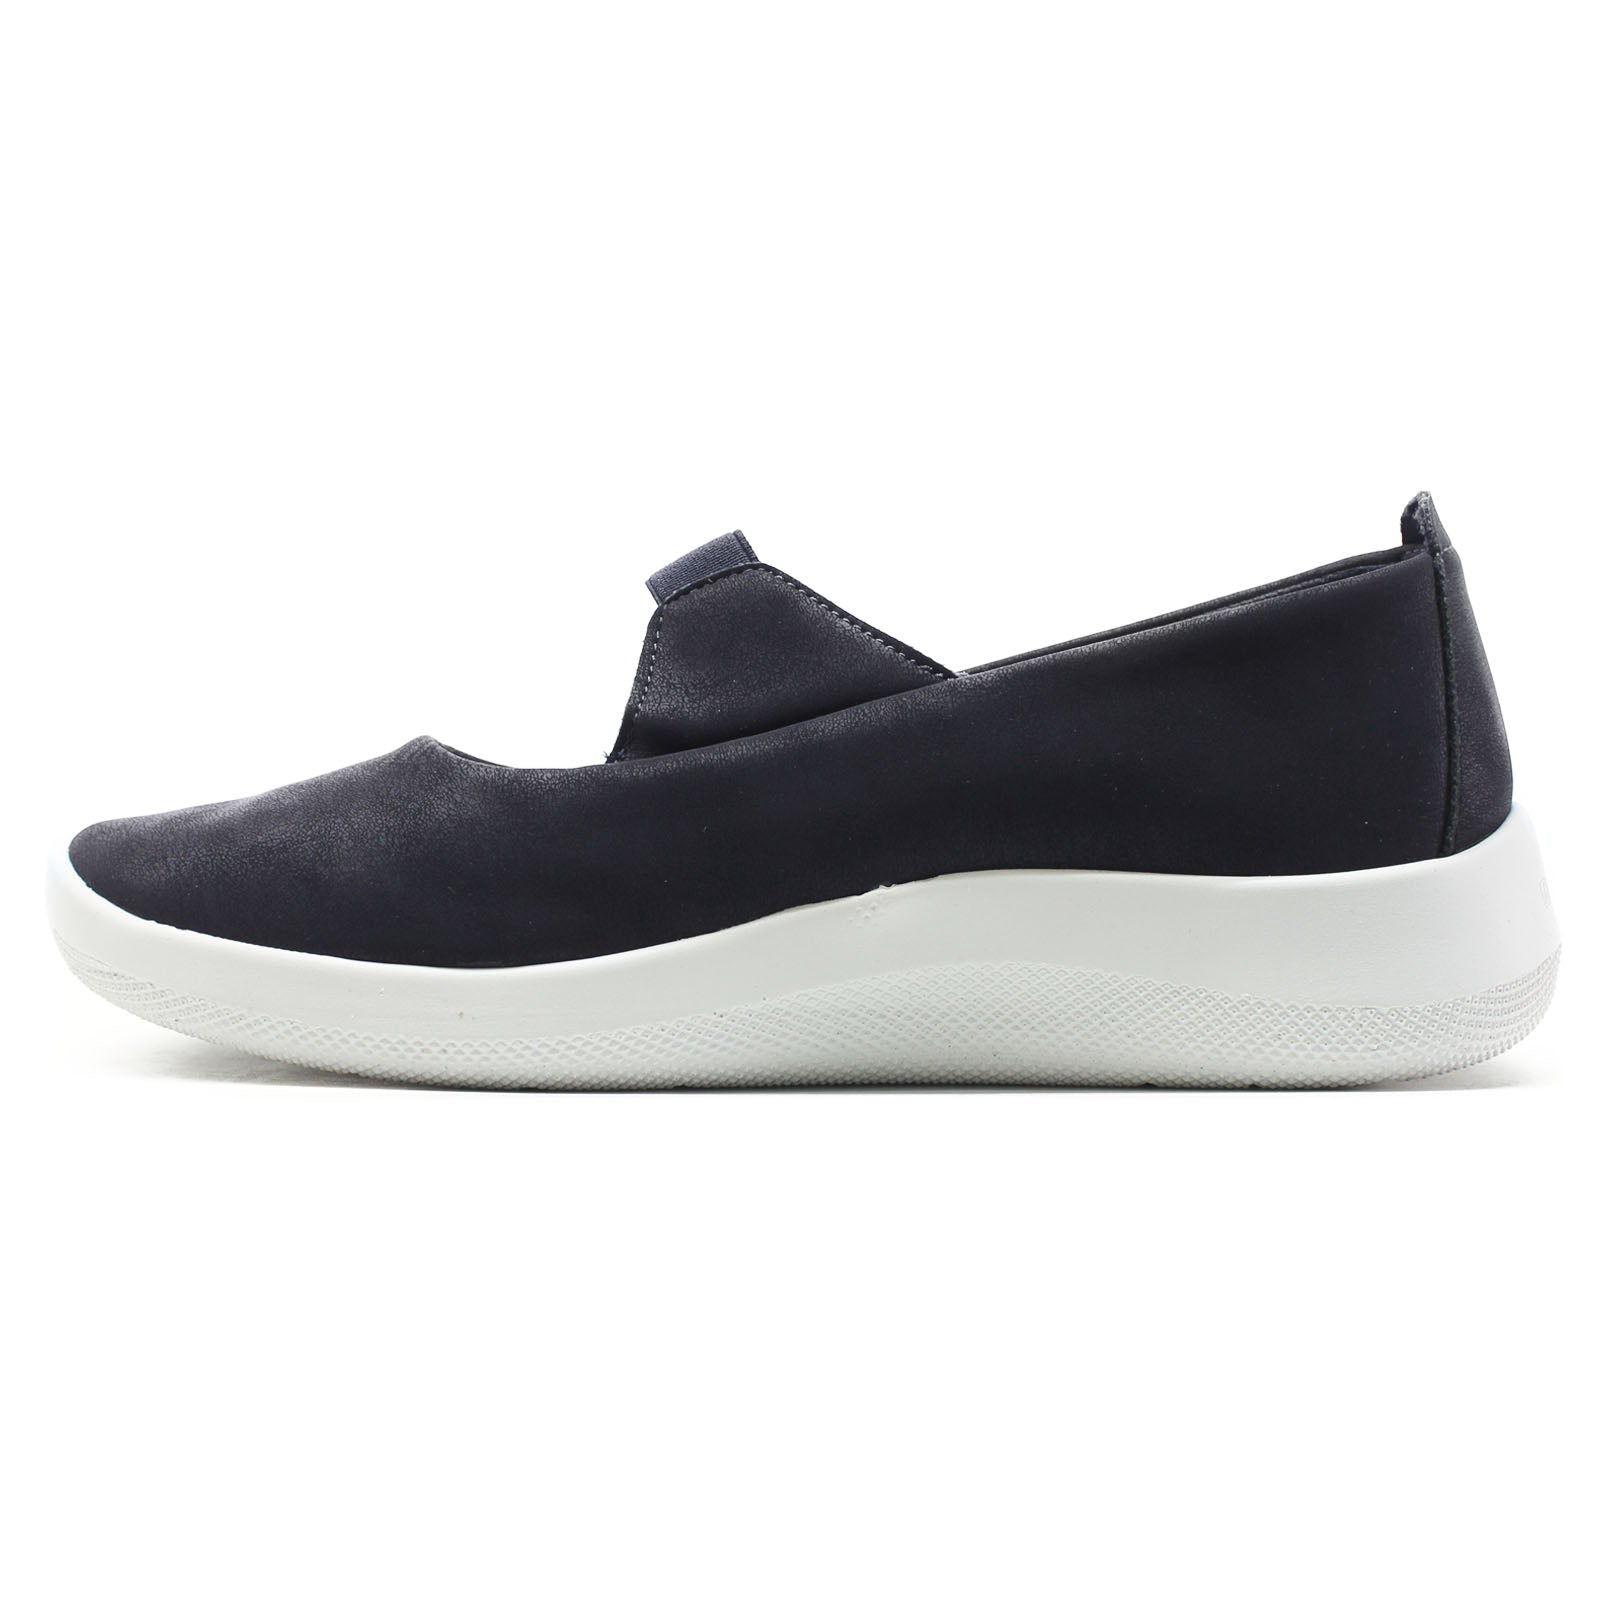 Arcopedico Heina Leather Women's Slip-on Shoes#color_fal coll navy